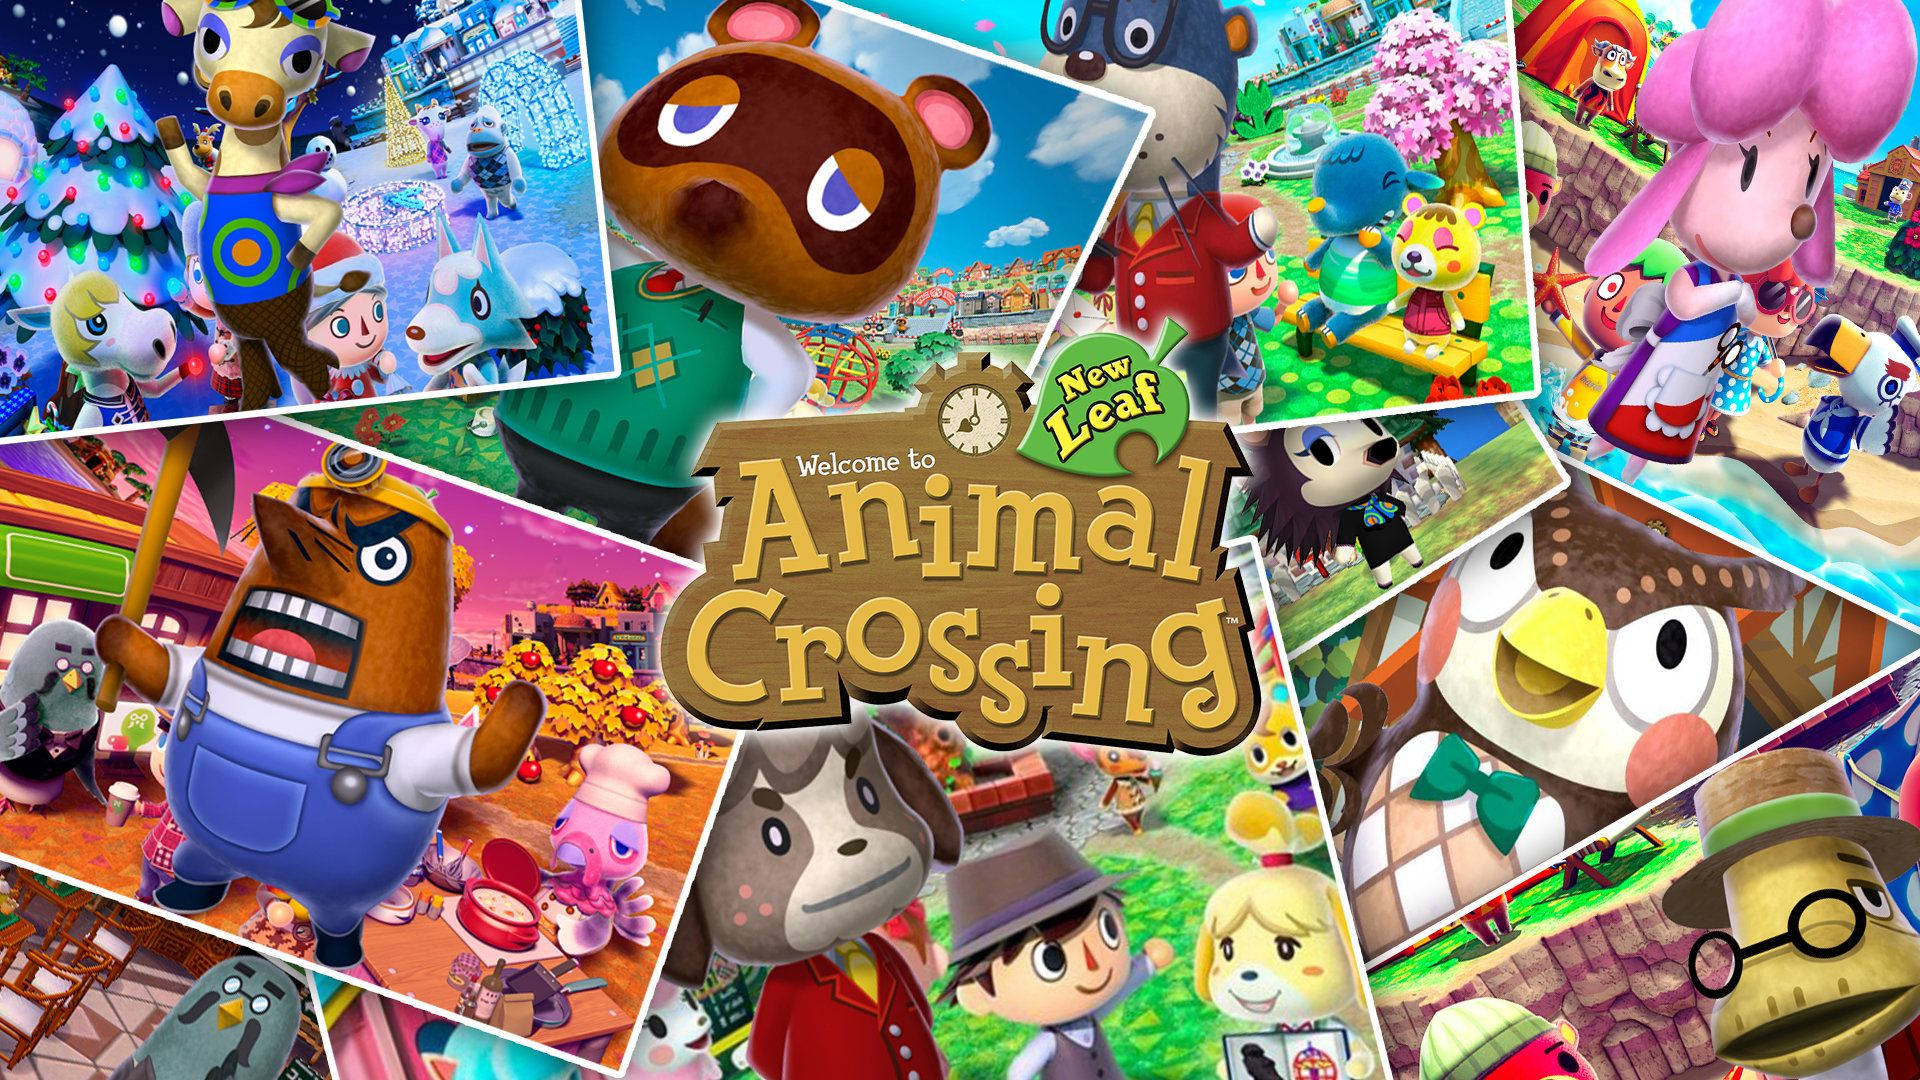 "Be the master of your own Animal Crossing experience!" Wallpaper